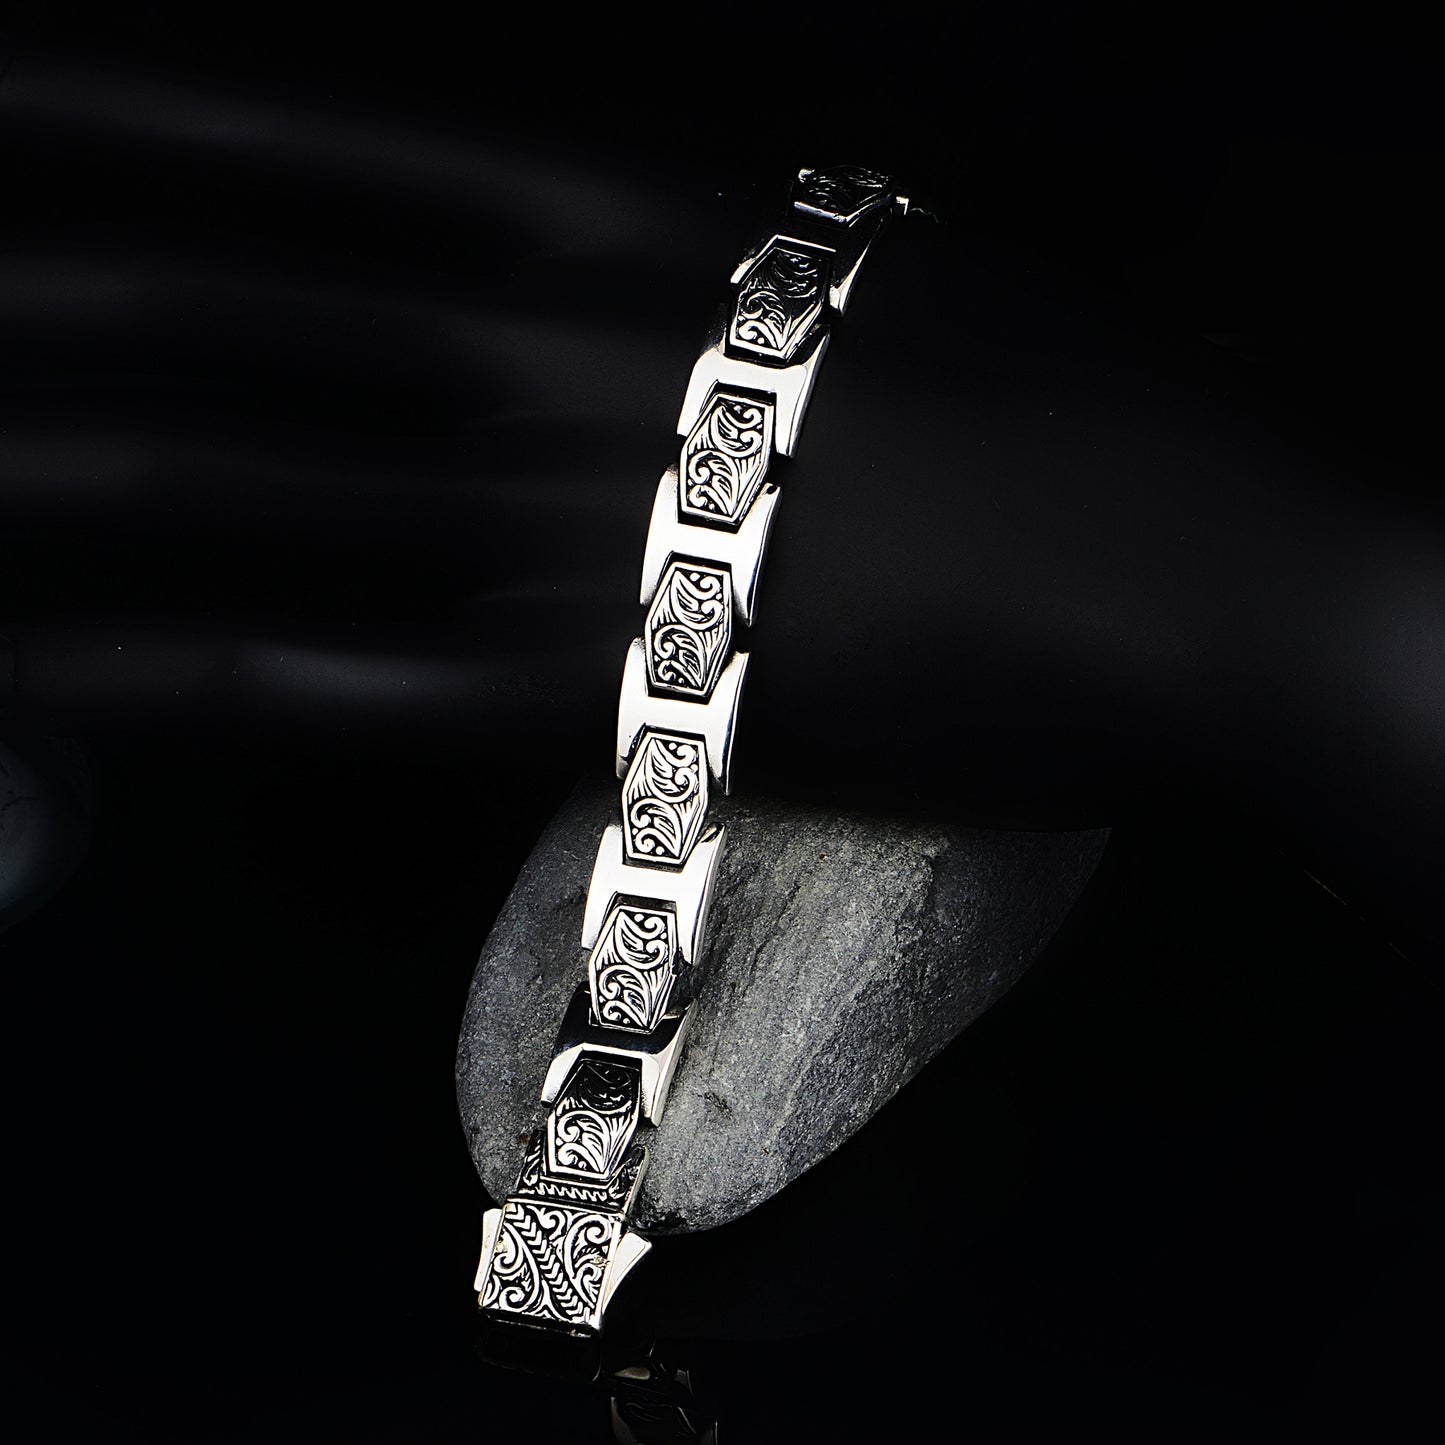 Silver Hand-Engraved Silver Chain Bracelet